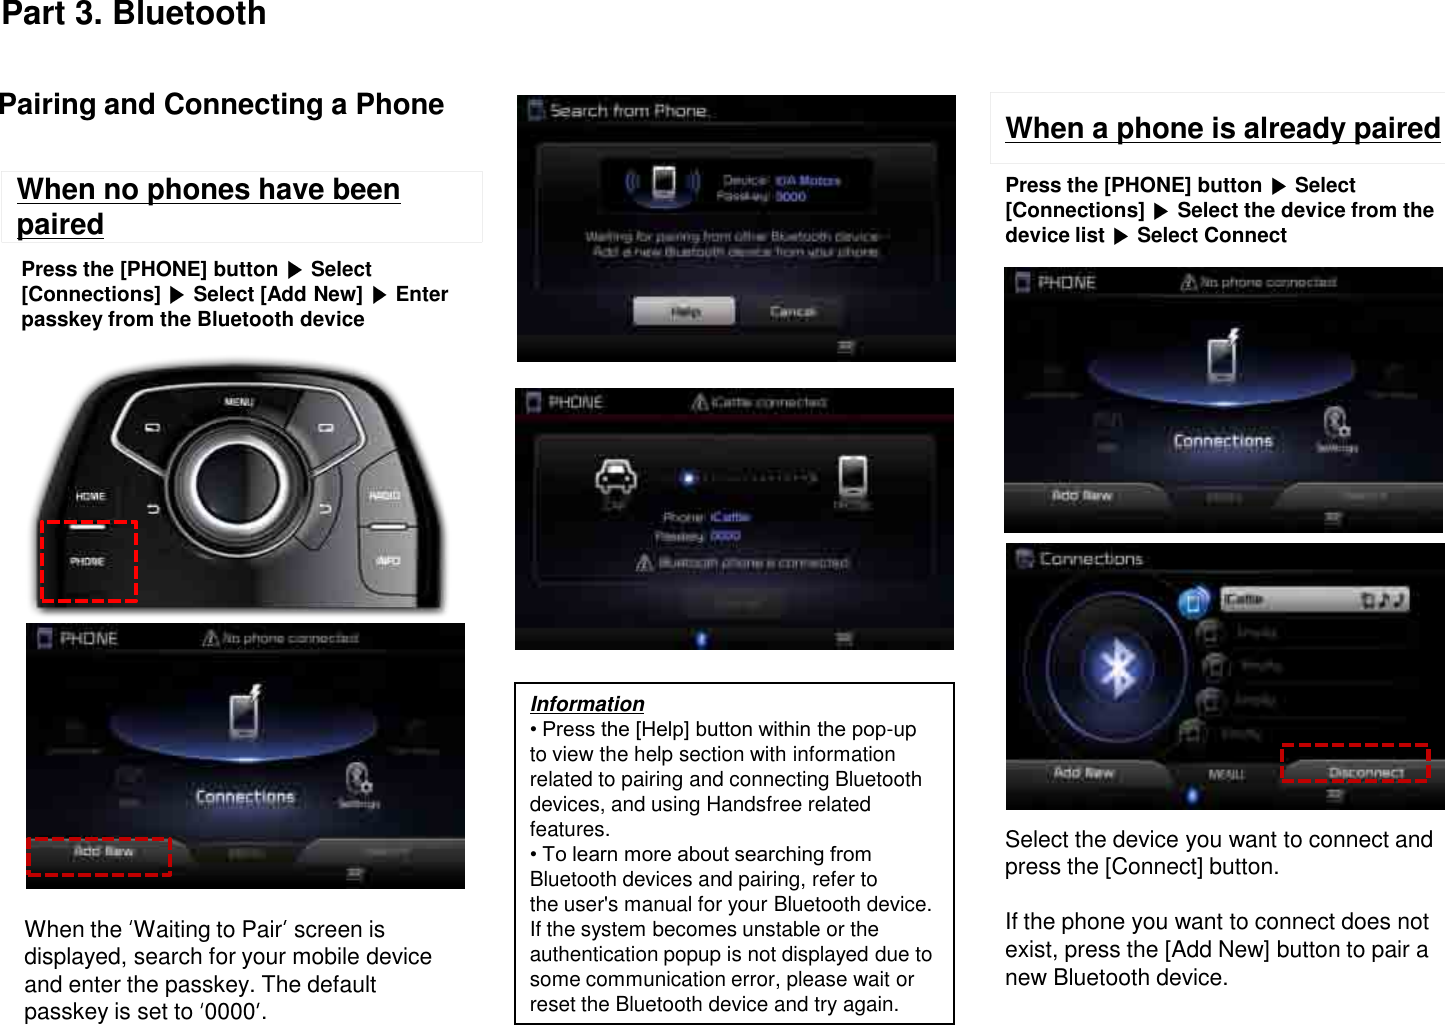 When no phones have been pairedInformation• Press the [Help] button within the pop-up to view the help section with information related to pairing and connecting Bluetooth devices, and using Handsfree related features.• To learn more about searching from Bluetooth devices and pairing, refer tothe user&apos;s manual for your Bluetooth device.If the system becomes unstable or the authentication popup is not displayed due to some communication error, please wait or reset the Bluetooth device and try again.Pairing and Connecting a PhonePress the [PHONE] button  Select [Connections]  Select [Add New]  Enter passkey from the Bluetooth deviceWhen a phone is already pairedPress the [PHONE] button  Select [Connections]  Select the device from the device list  Select ConnectSelect the device you want to connect and press the [Connect] button.If the phone you want to connect does not exist, press the [Add New] button to pair a new Bluetooth device.When the  Waiting to Pair screen is displayed, search for your mobile device and enter the passkey. The default passkey is set to  0000 .Part 3. Bluetooth